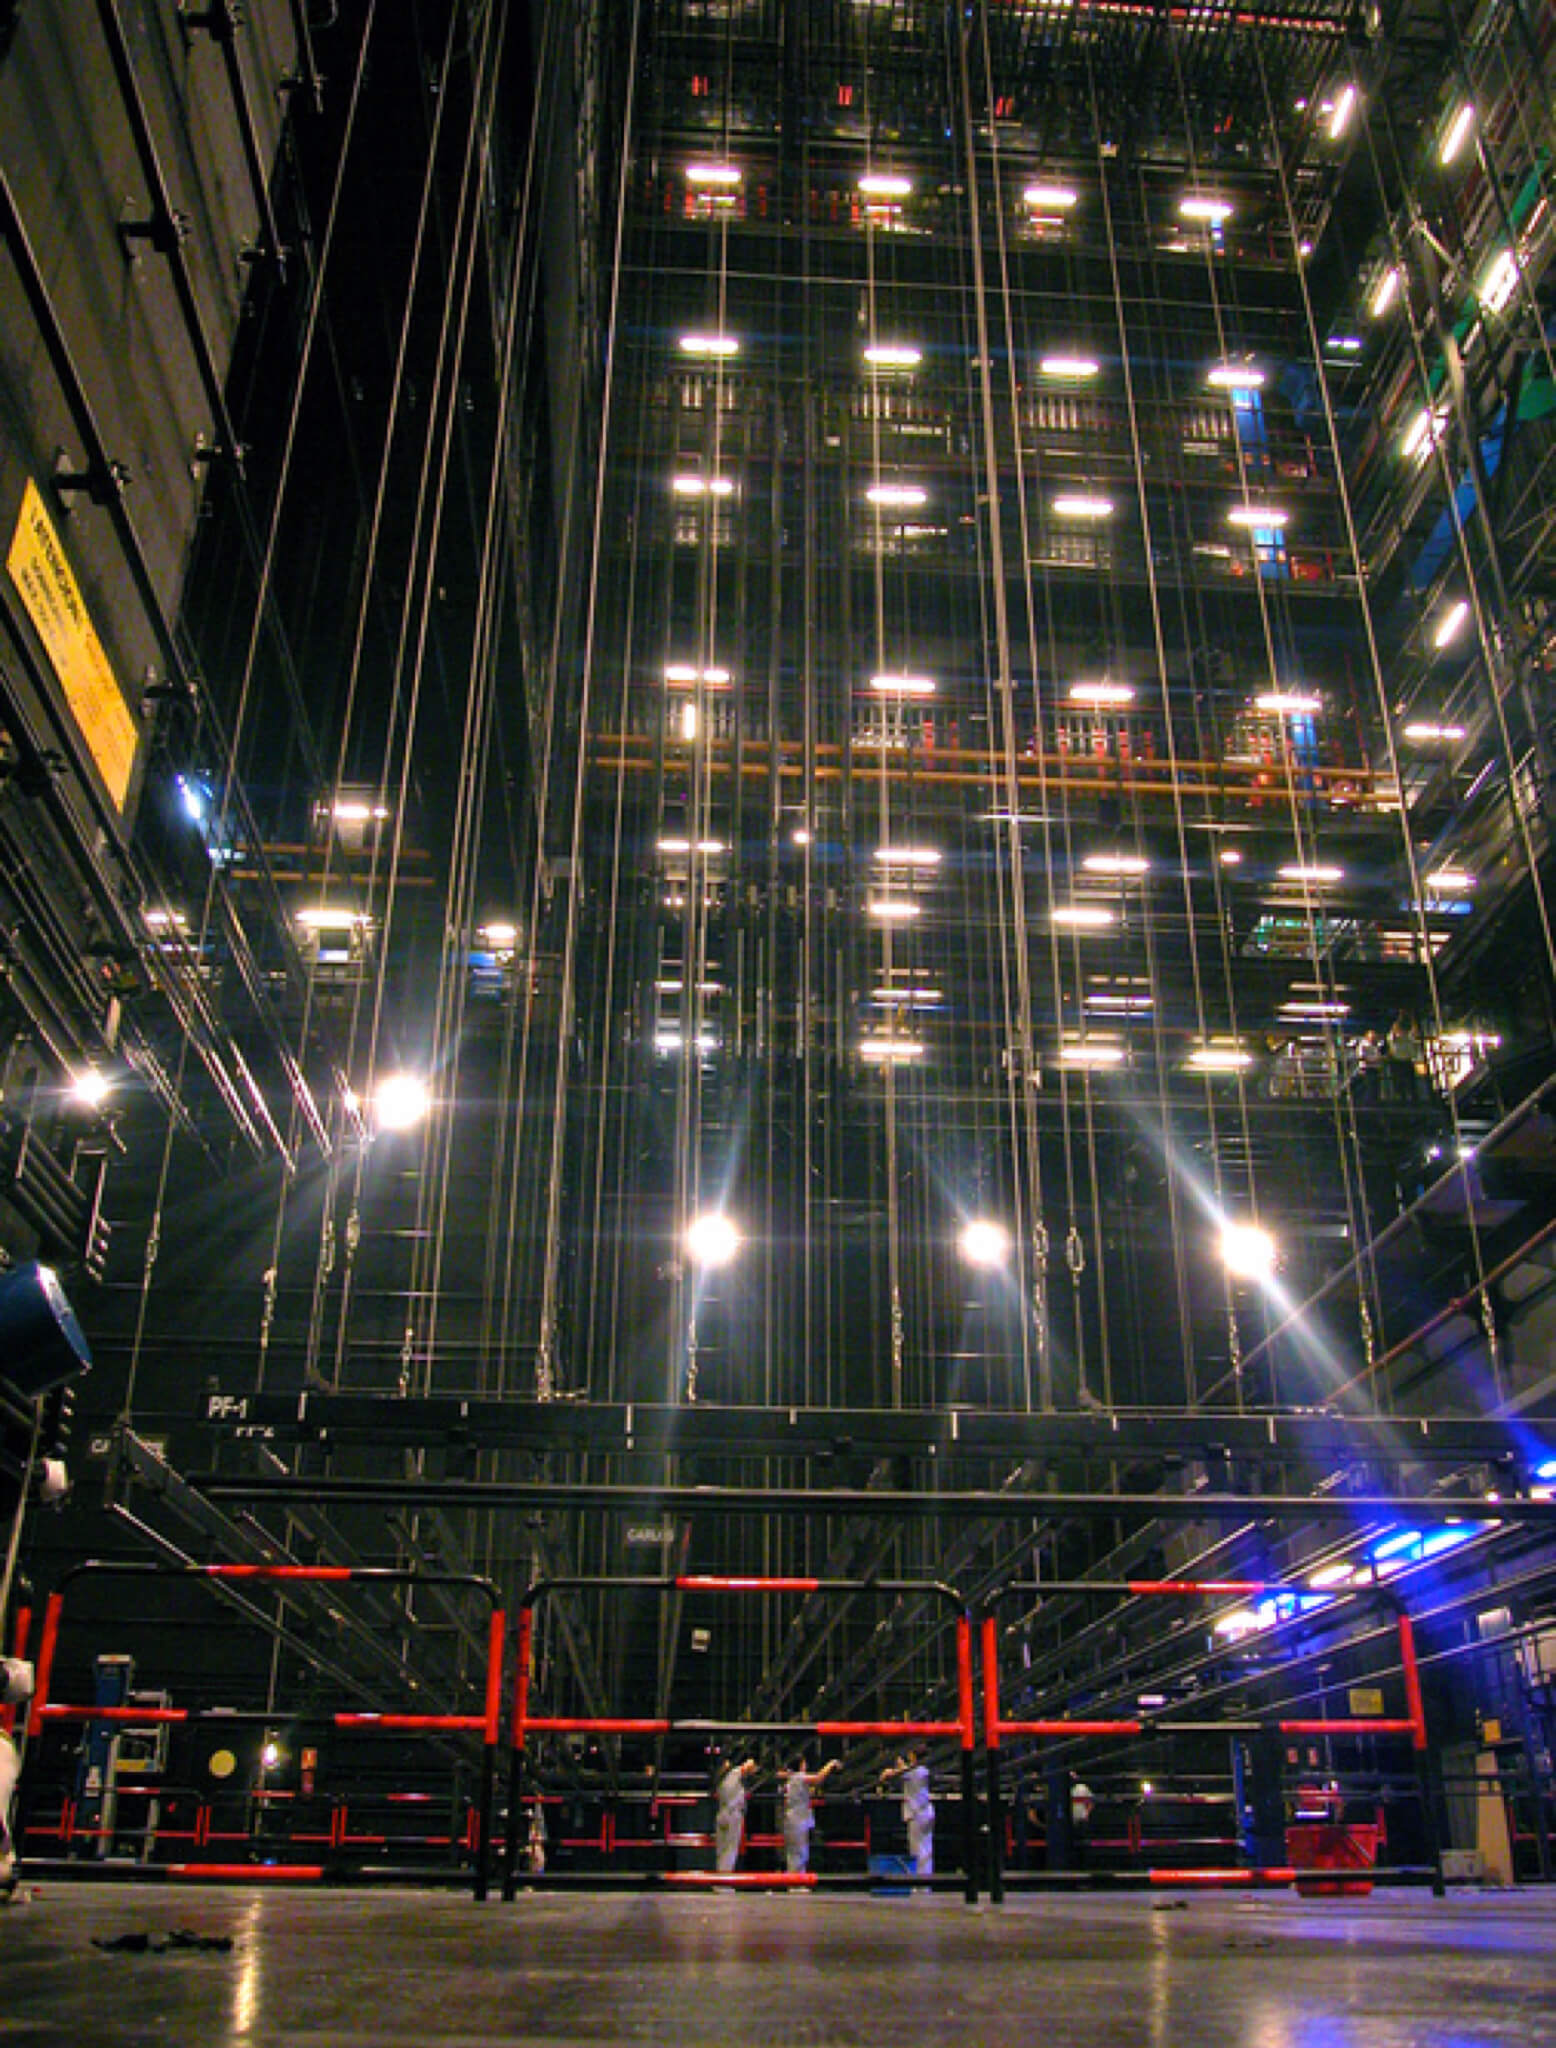 Interior of the stage house at the Teatro Real. Photo: Javier at the Real